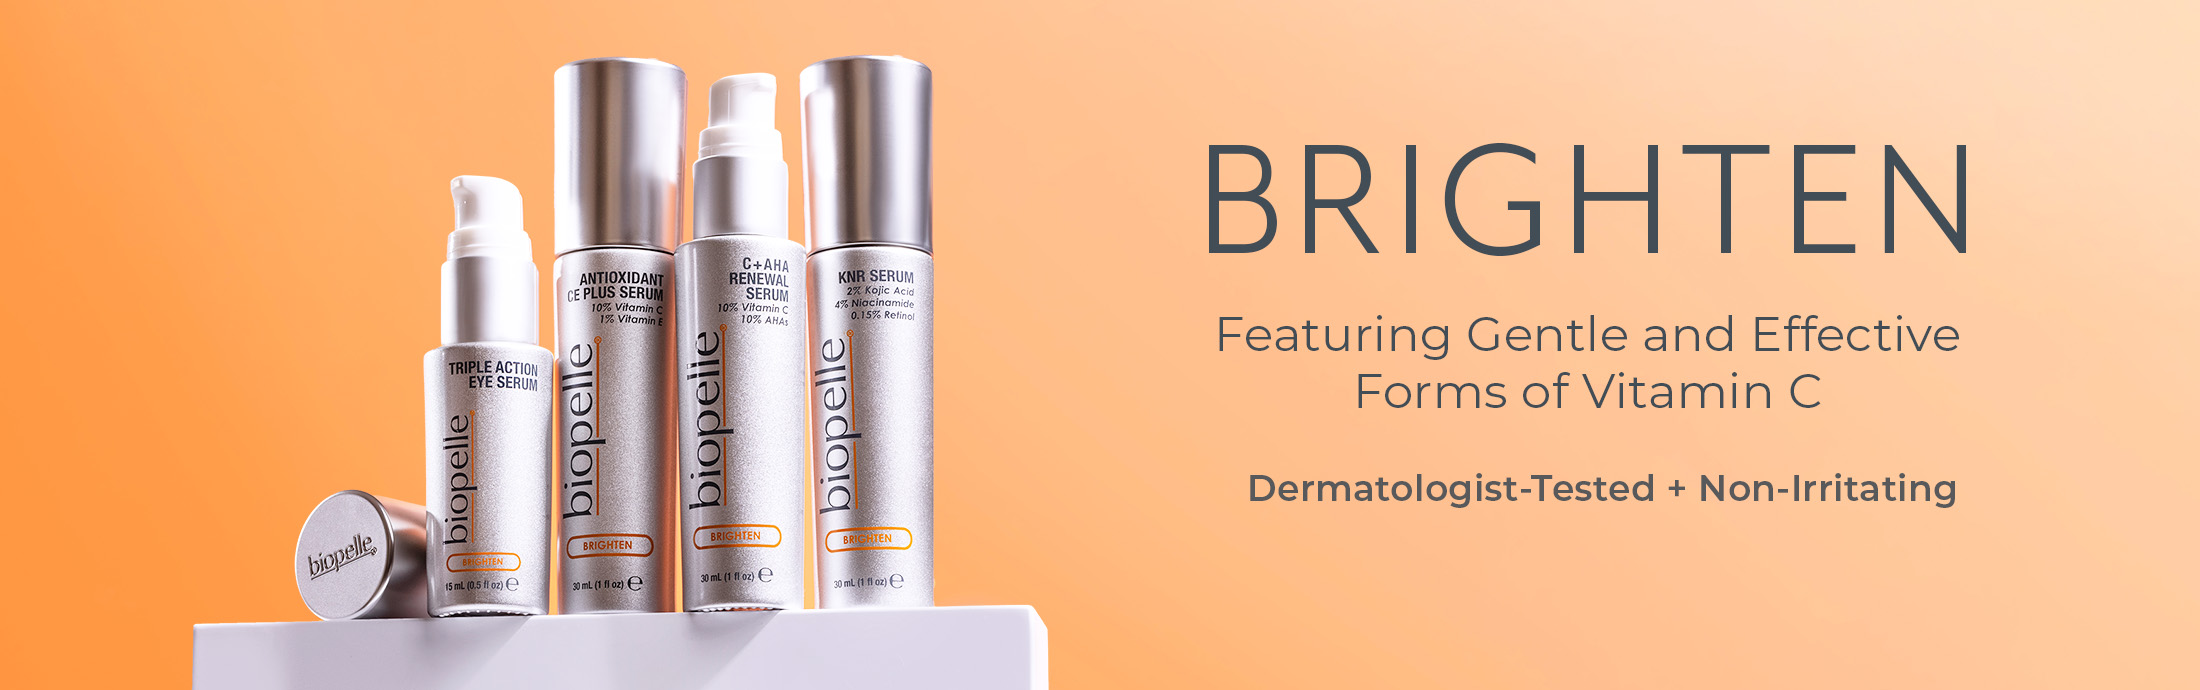 Brighten. Featuring Gentle and Effective Forms of Vitamin C. Dermatologist Tested. Non Irritating